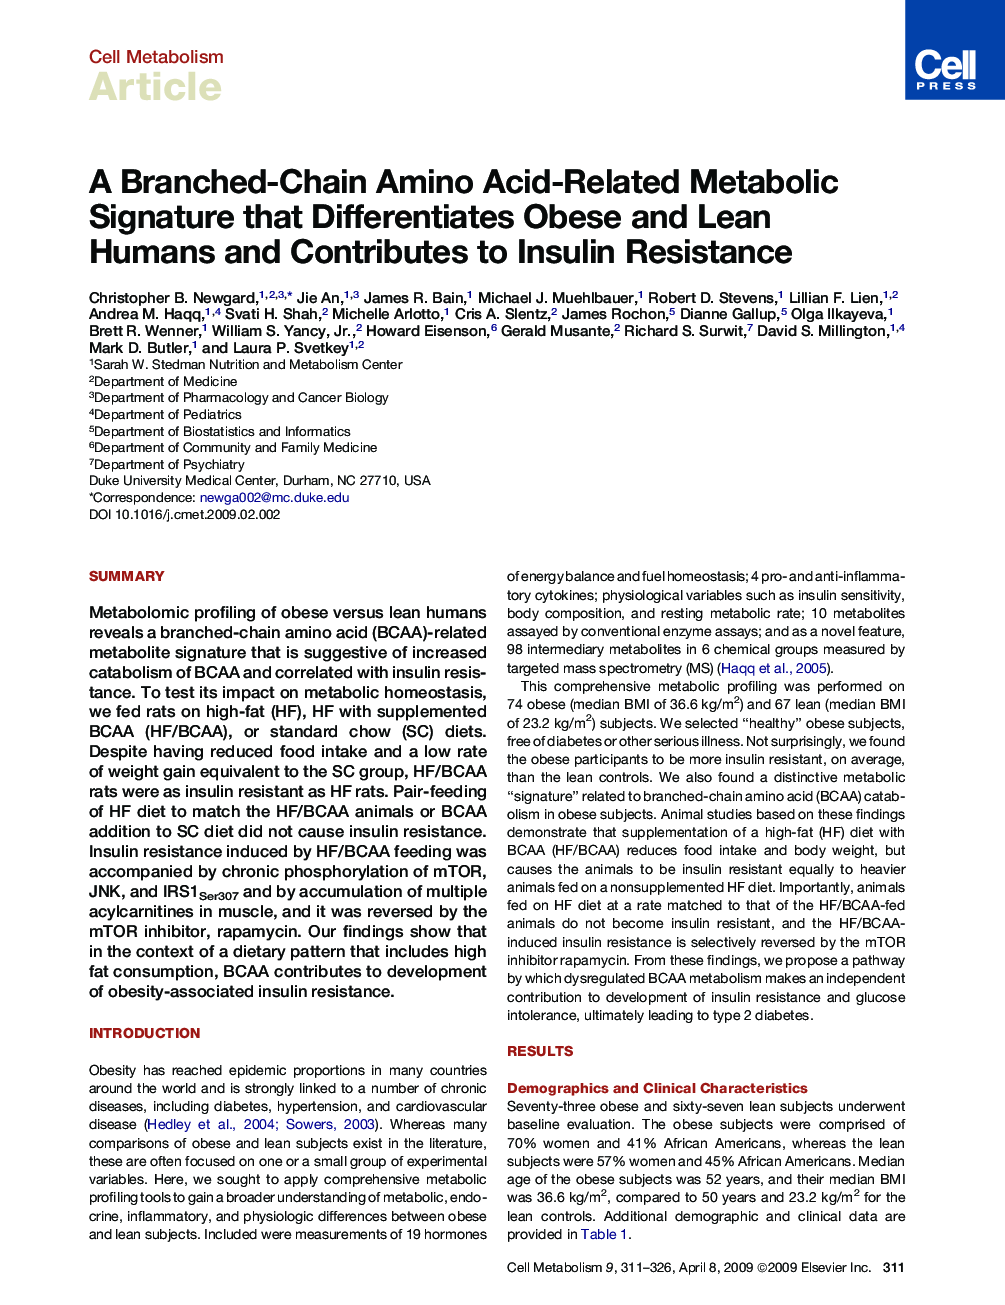 A Branched-Chain Amino Acid-Related Metabolic Signature that Differentiates Obese and Lean Humans and Contributes to Insulin Resistance